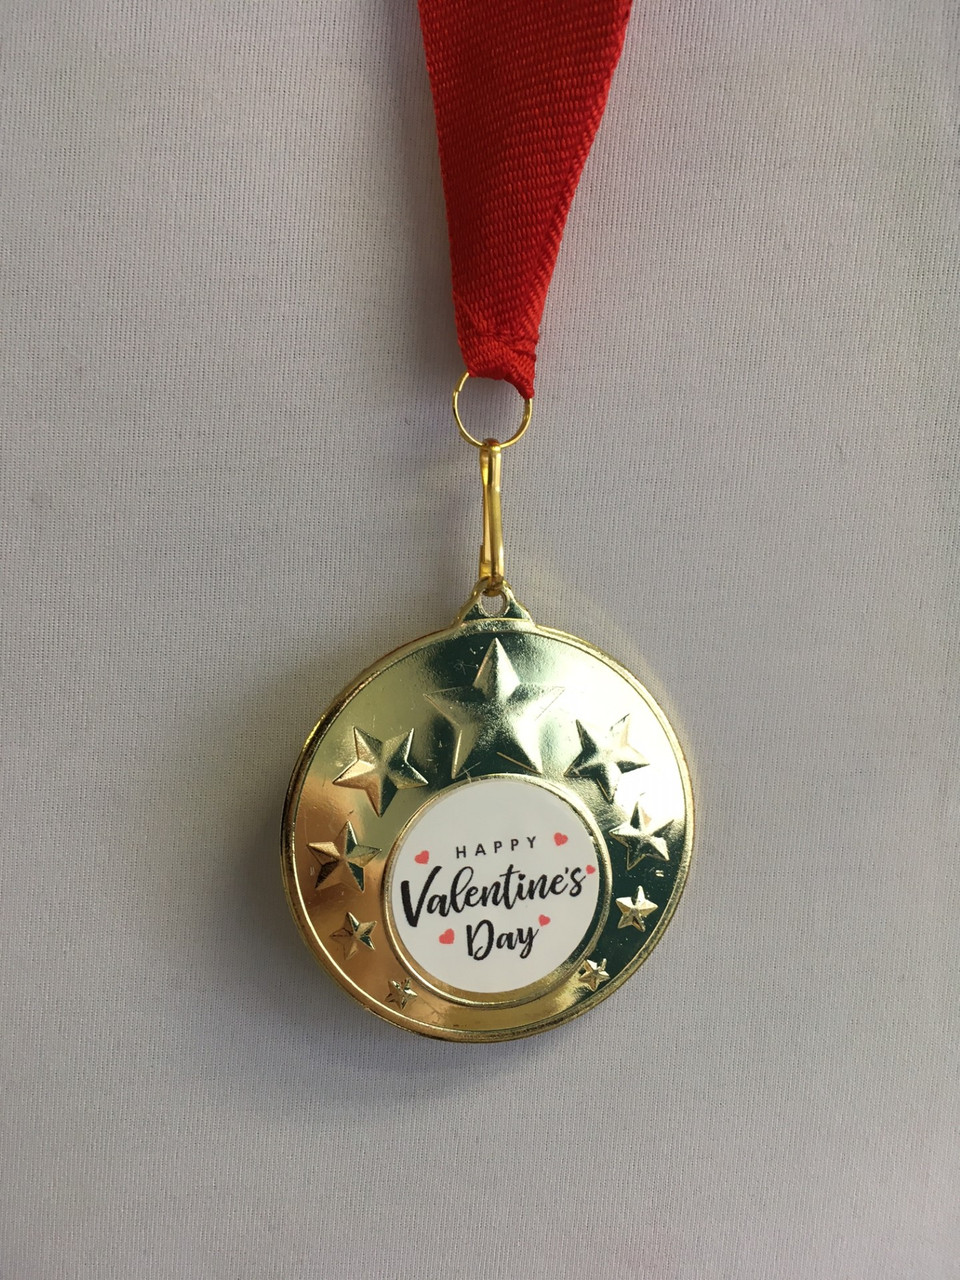 Valentine's Gift Personalised Medal 50mm with Happy Valentine's Day Logo